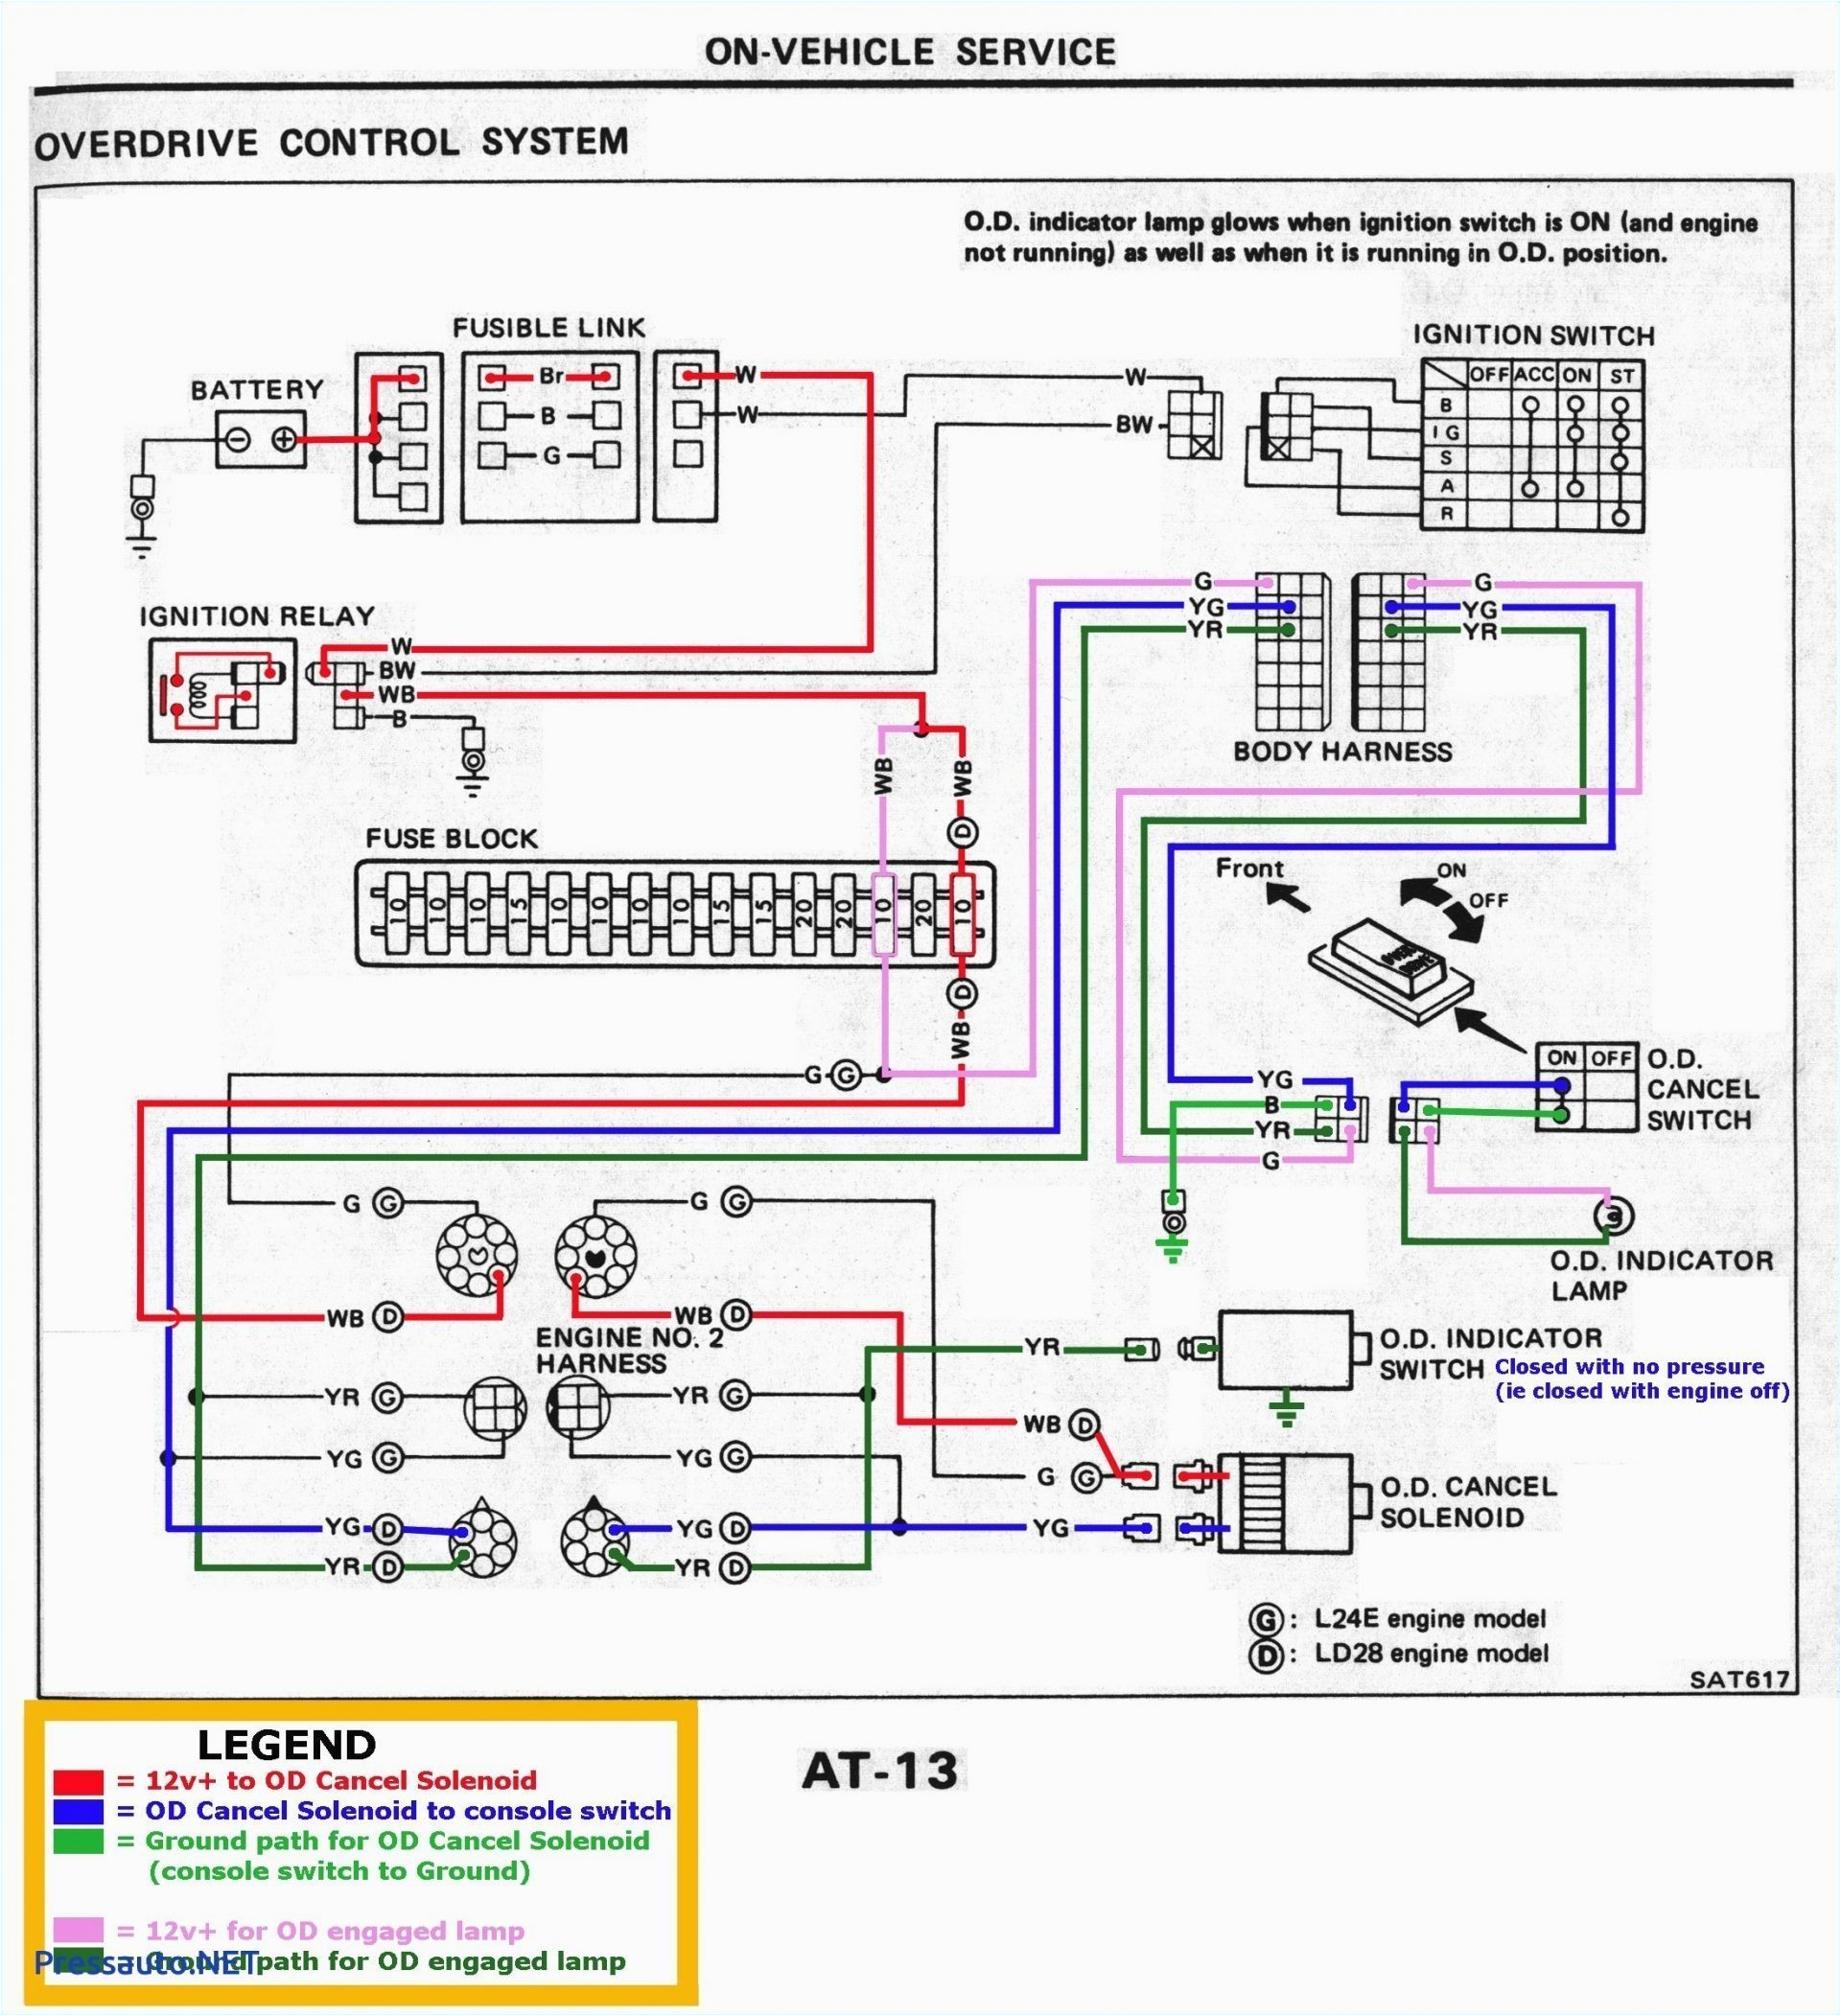 wiring harness interview questions wiring diagram img wiring harness design engineer interview questions wiring harness design interview questions